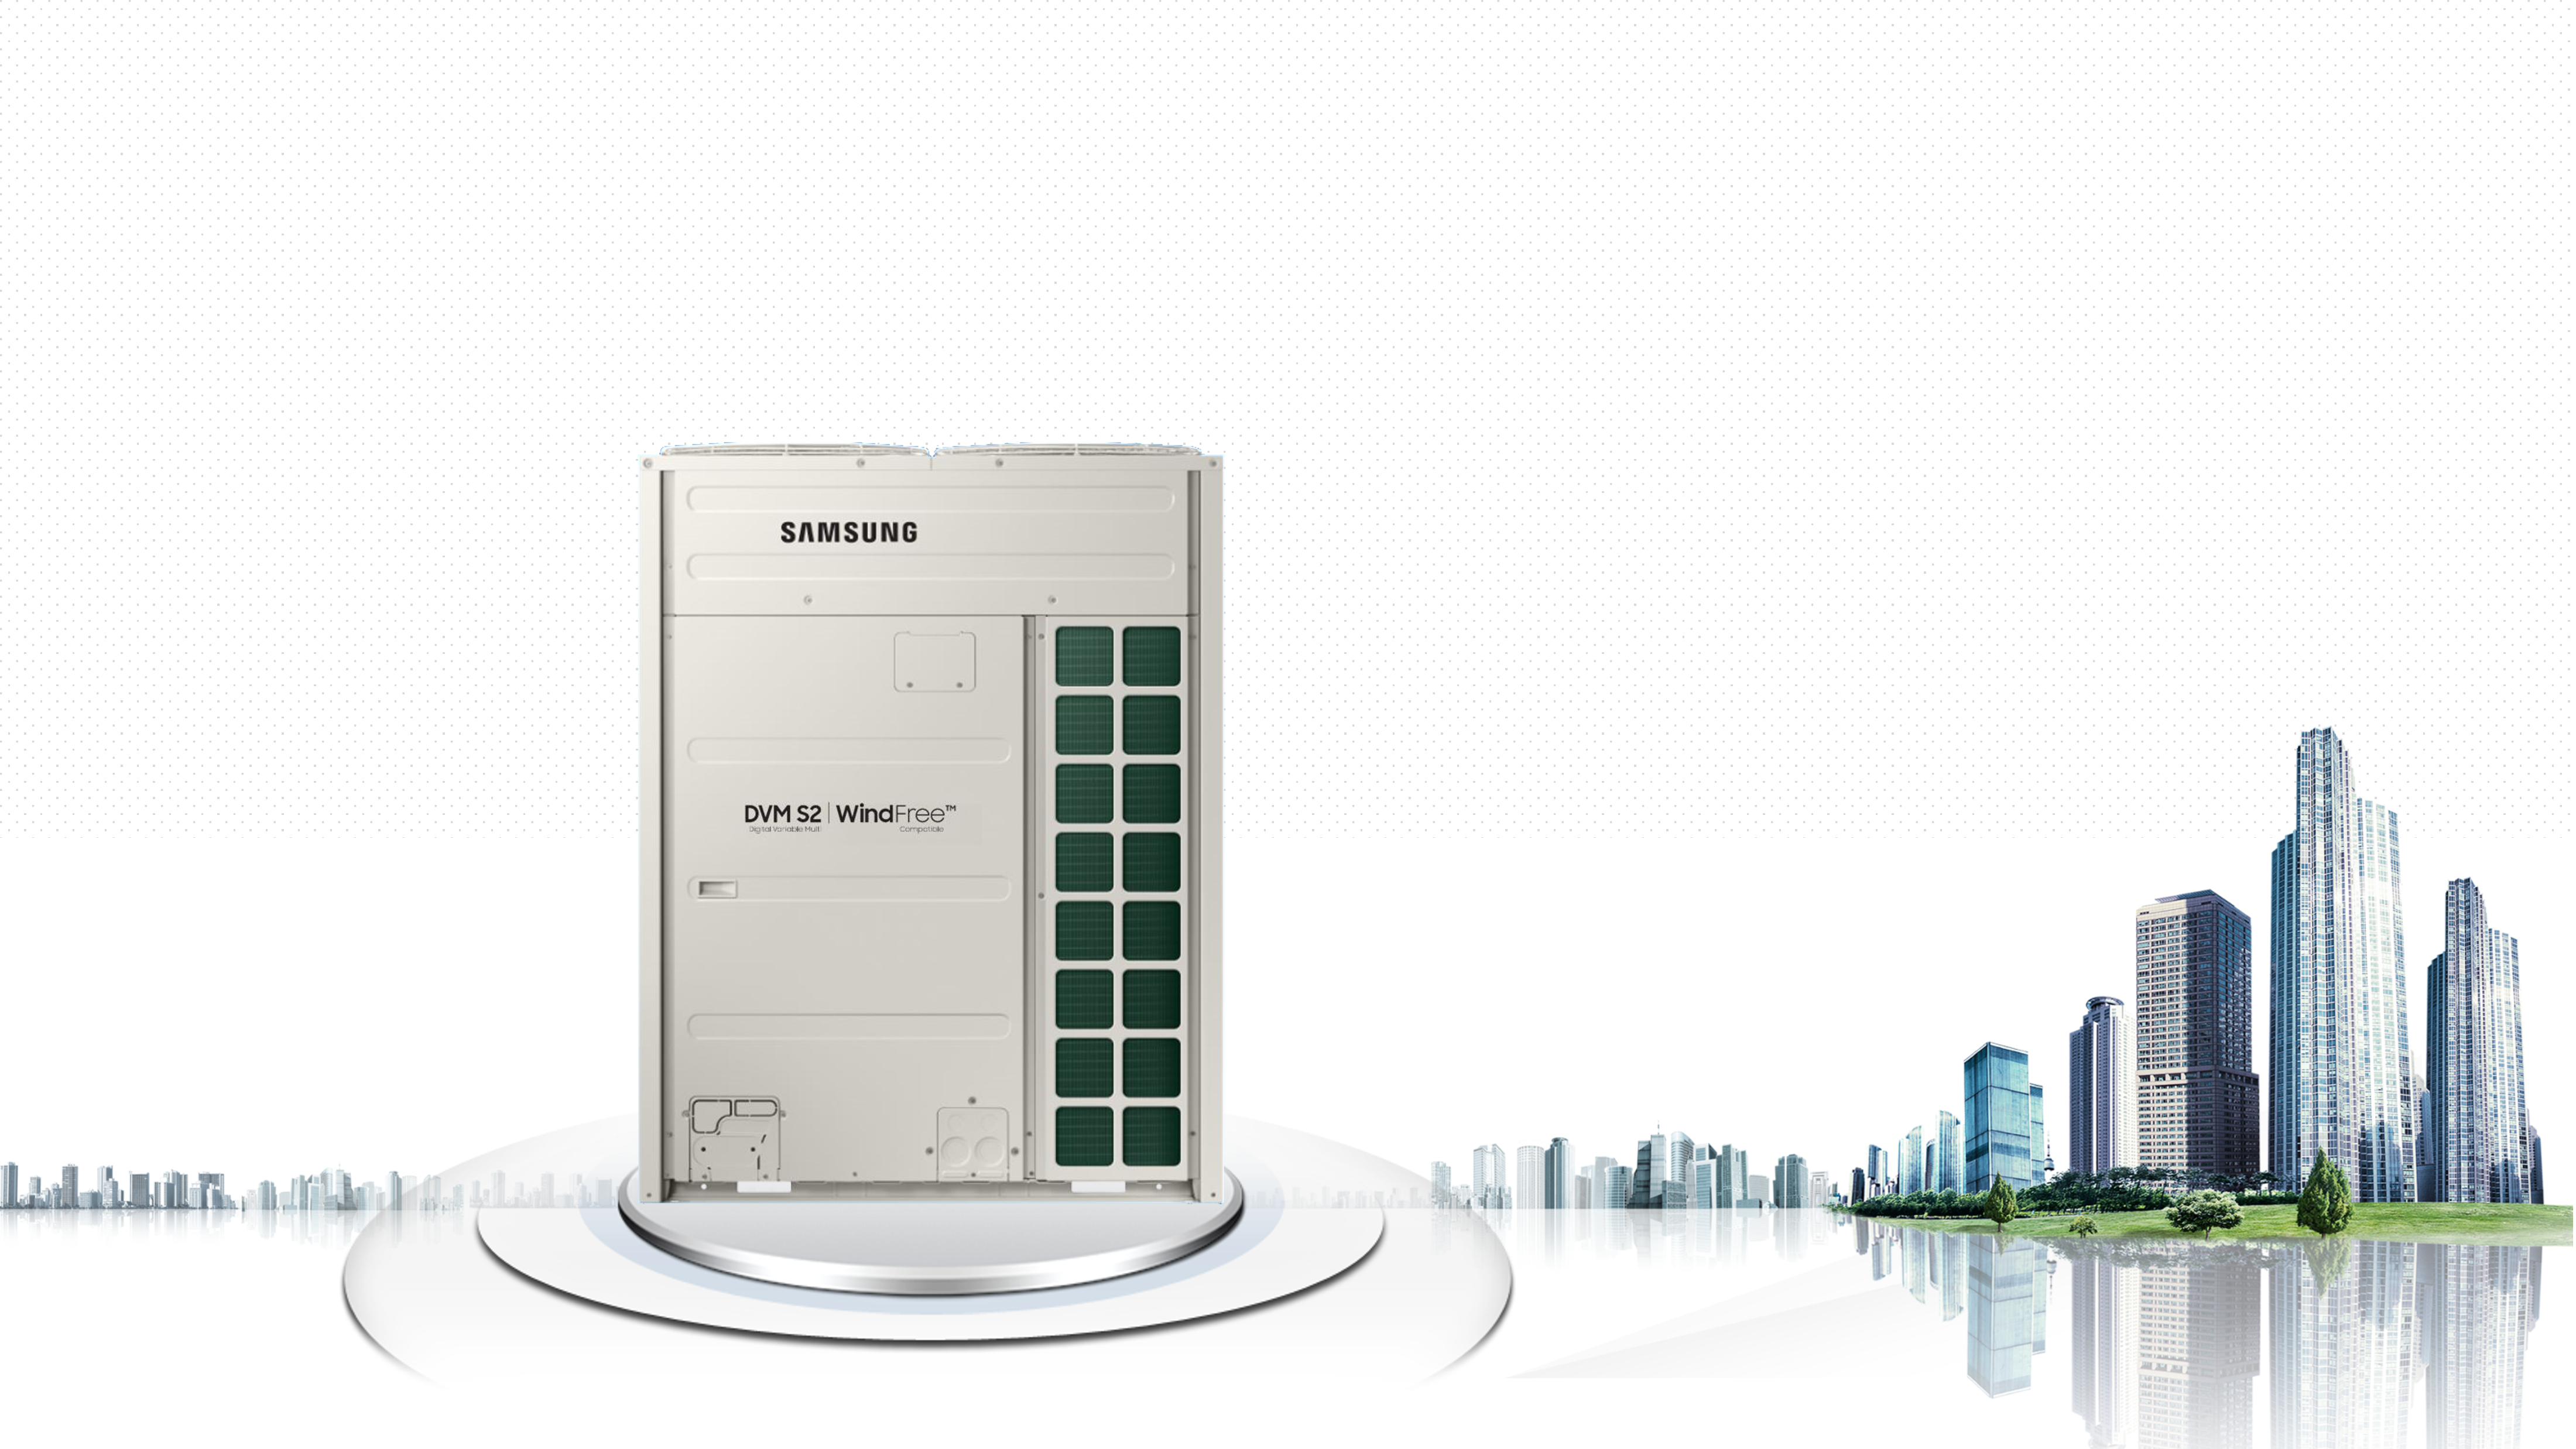 Samsung India Launches India's First AI enabled New DVM S2 Variable Refrigerant Flow (VRF) ACs with Smarter and Faster Cooling